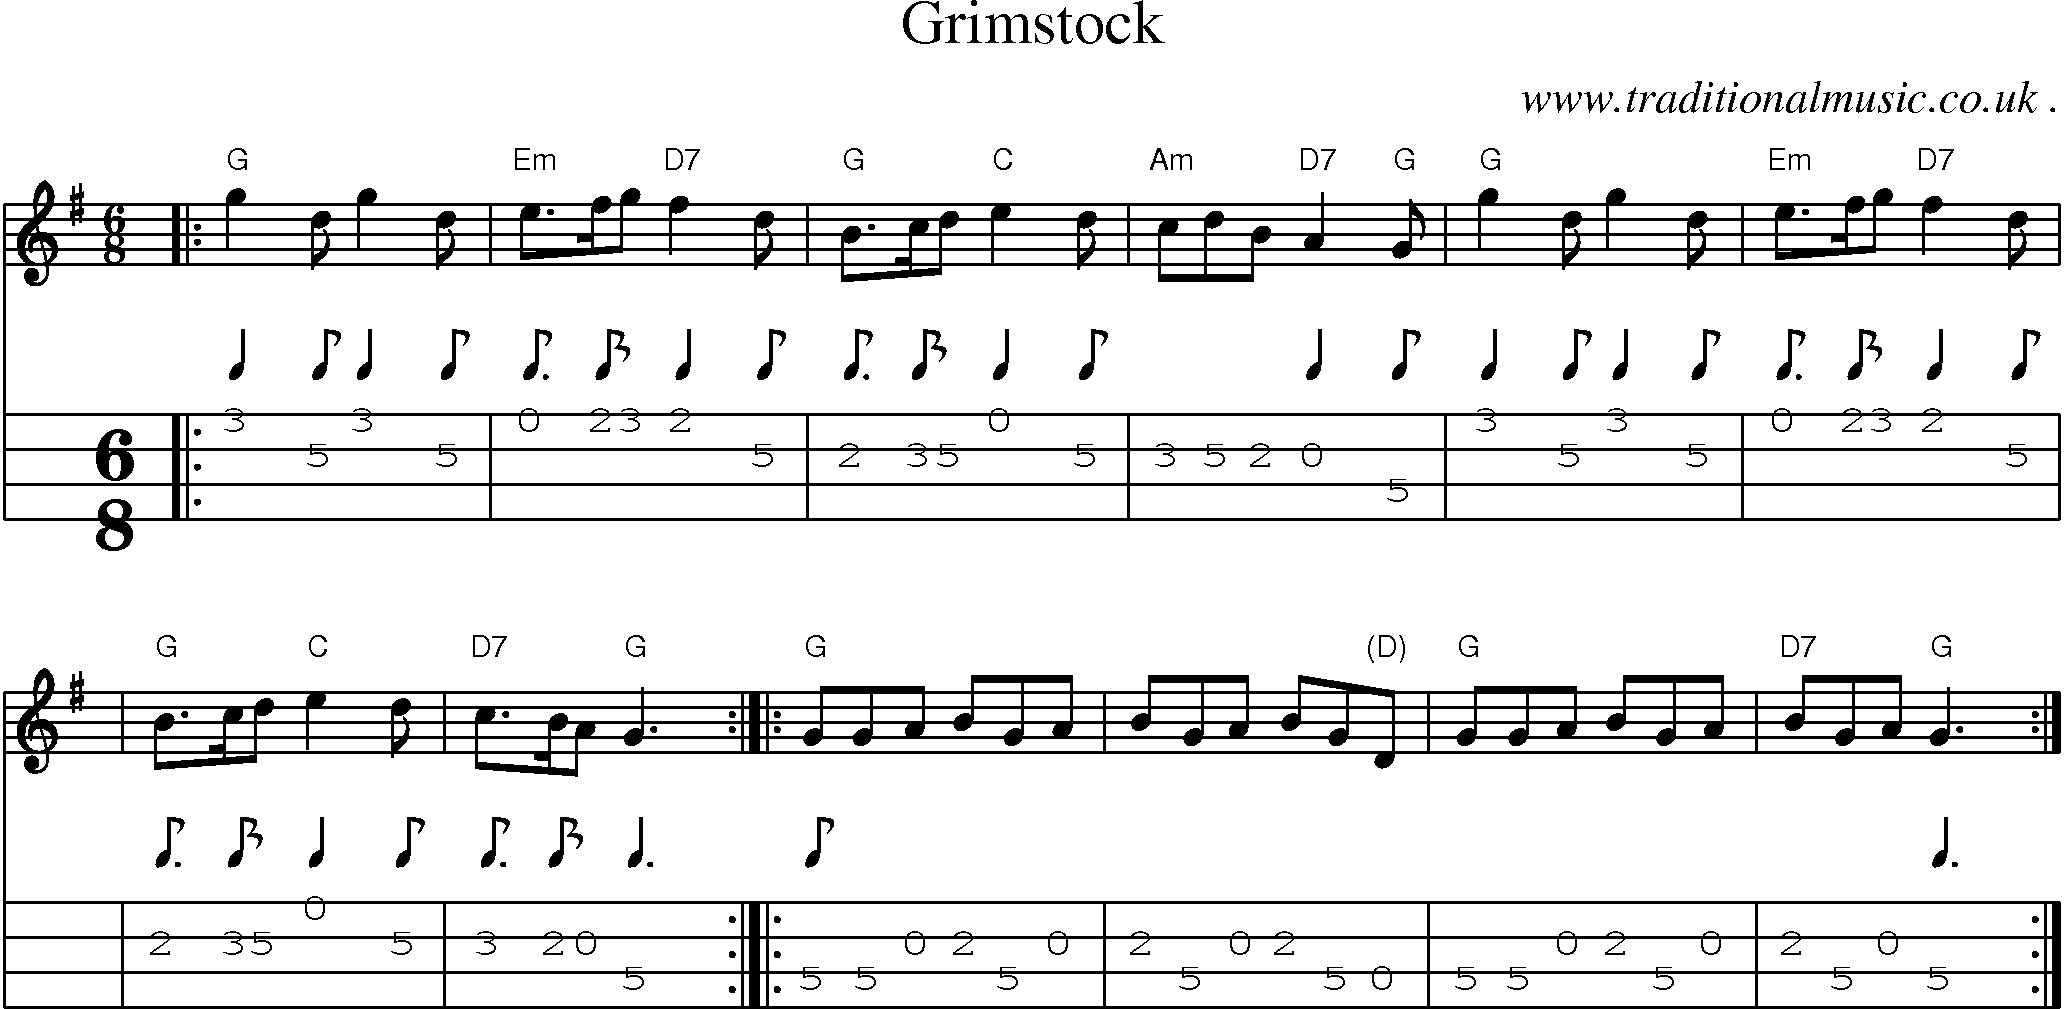 Sheet-music  score, Chords and Mandolin Tabs for Grimstock